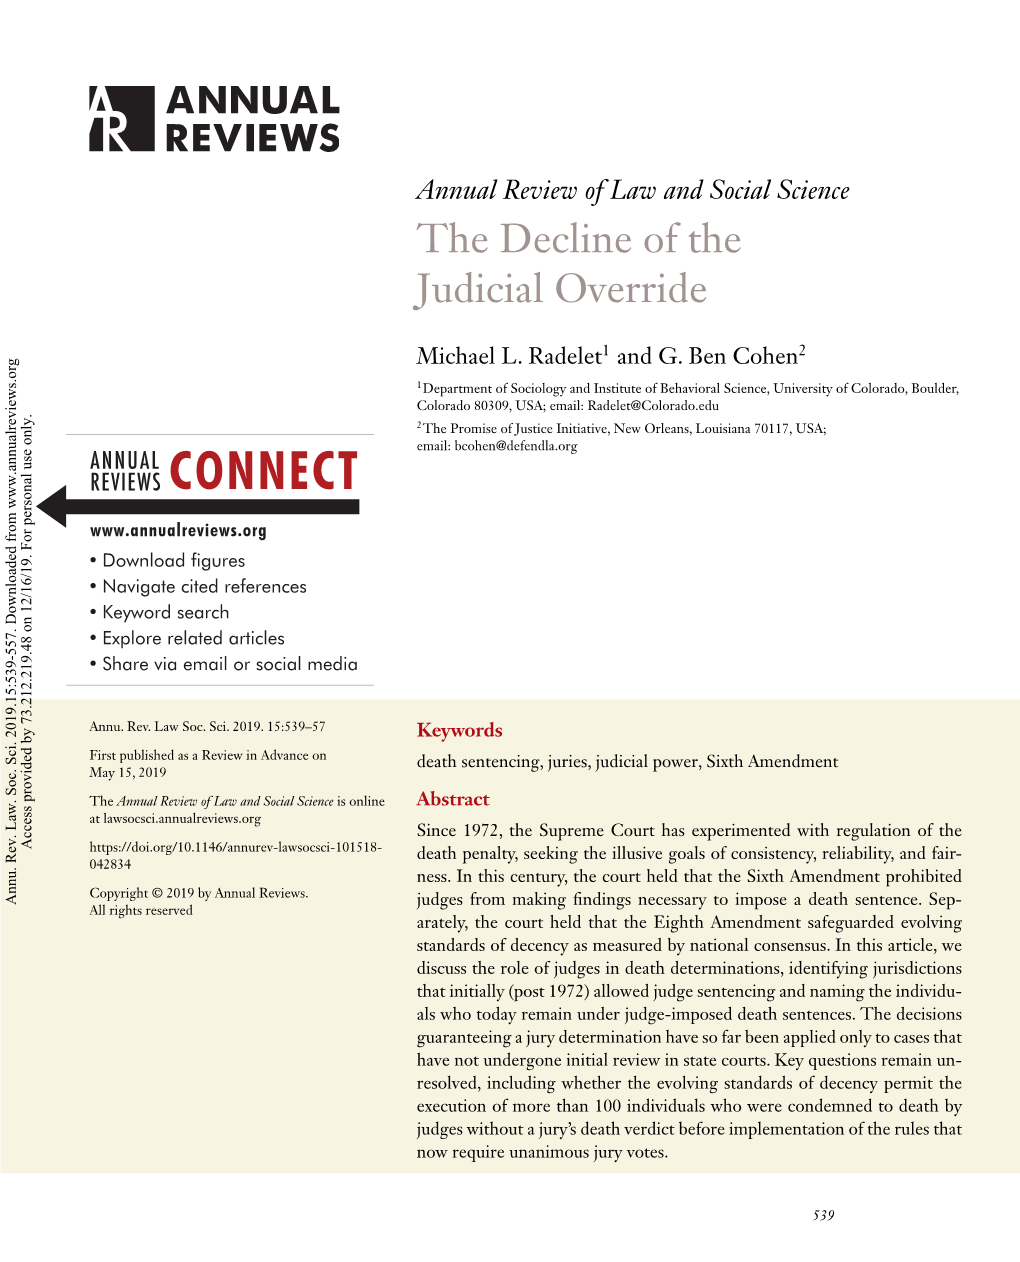 The Decline of the Judicial Override